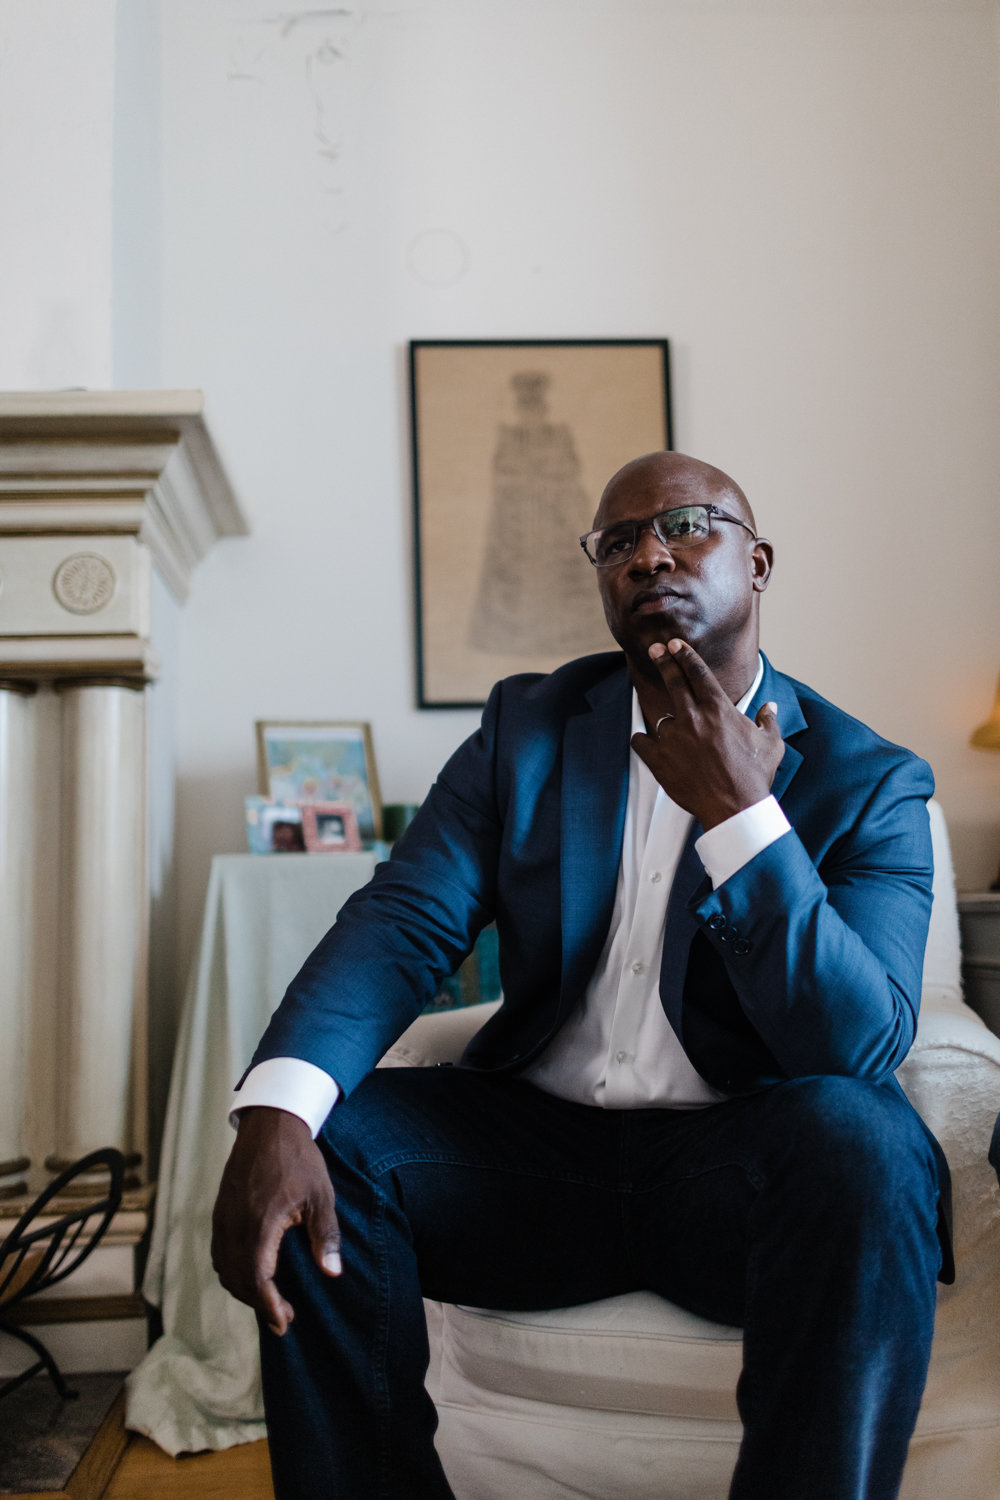 Health care and criminal justice reform are key pillars of Jamaal Bowman’s campaign platform. He looks to unseat U.S. Rep. Eliot Engel in the upcoming Democratic primary on June 23.